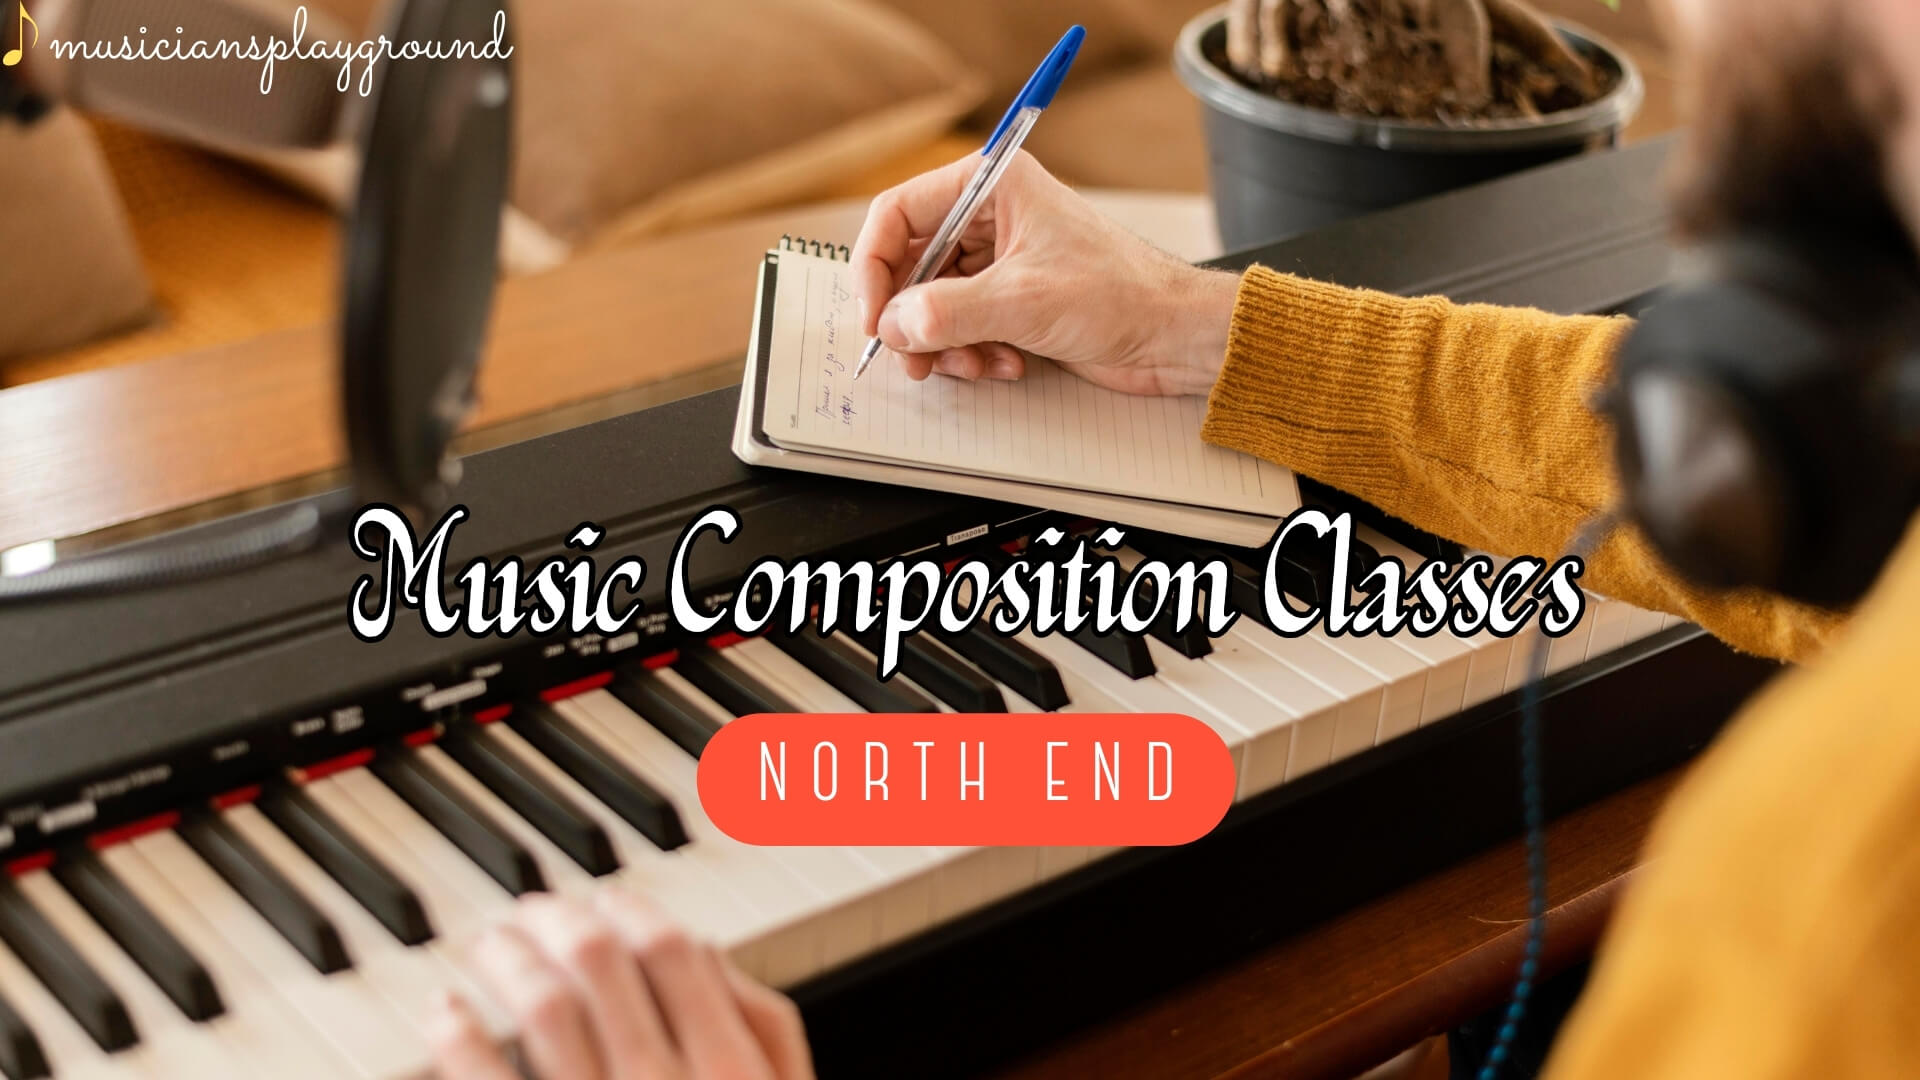 Music Composition Classes in North End, Massachusetts: Unlock Your Musical Potential at Musicians Playground